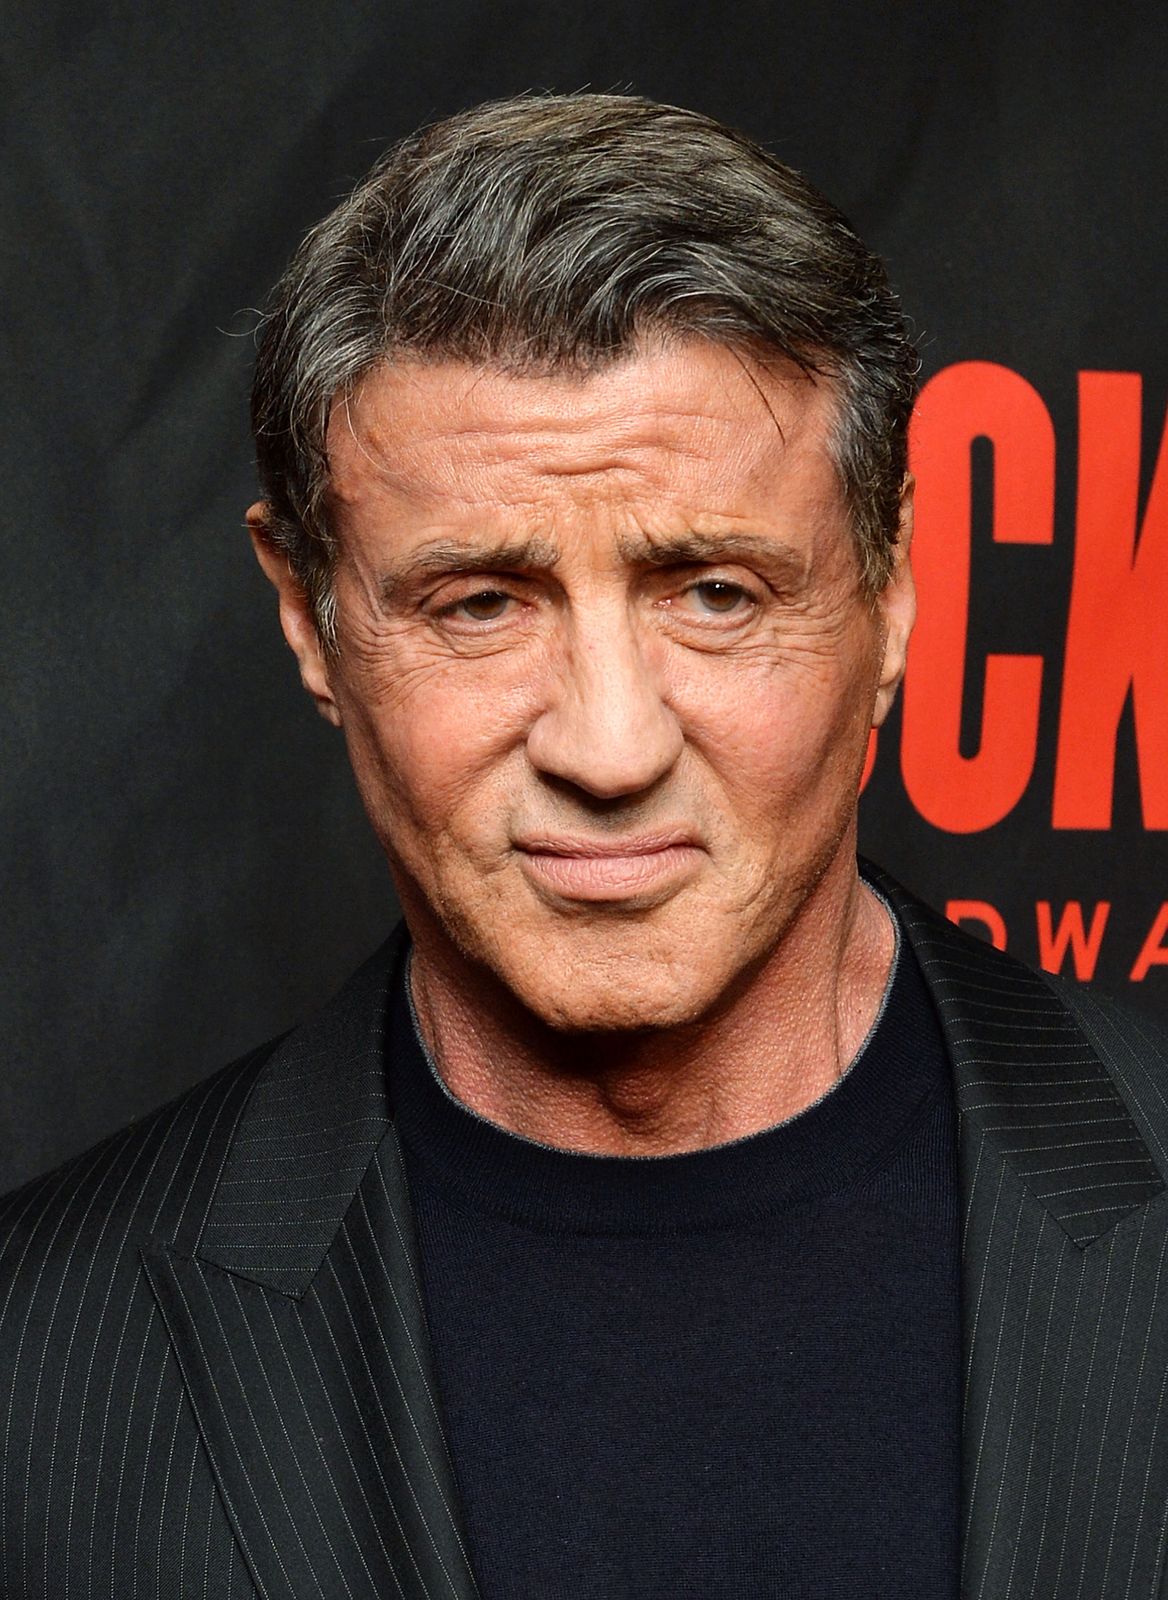 Sylvester Stallone at the "Rocky" Broadway opening night after party at Roseland Ballroom on March 13, 2014 in New York City. | Source: Getty Images